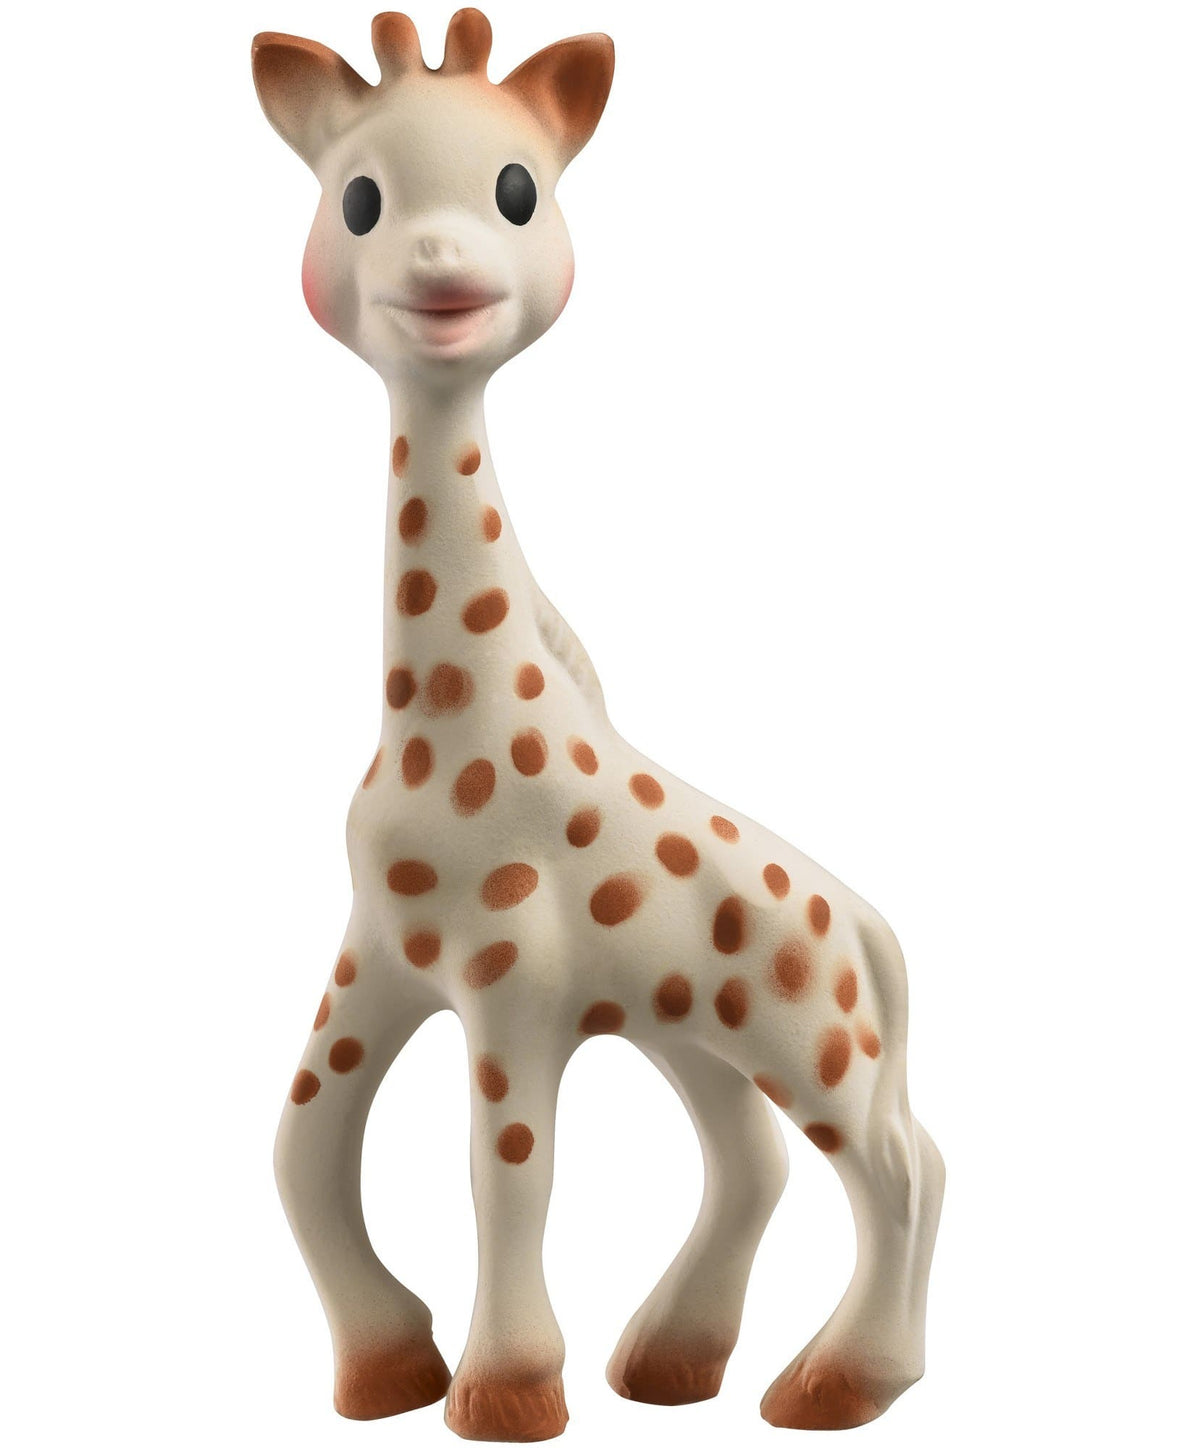 Sophie The Giraffe Teething Toy  Toys & Gifts – Mamas & Papas IE